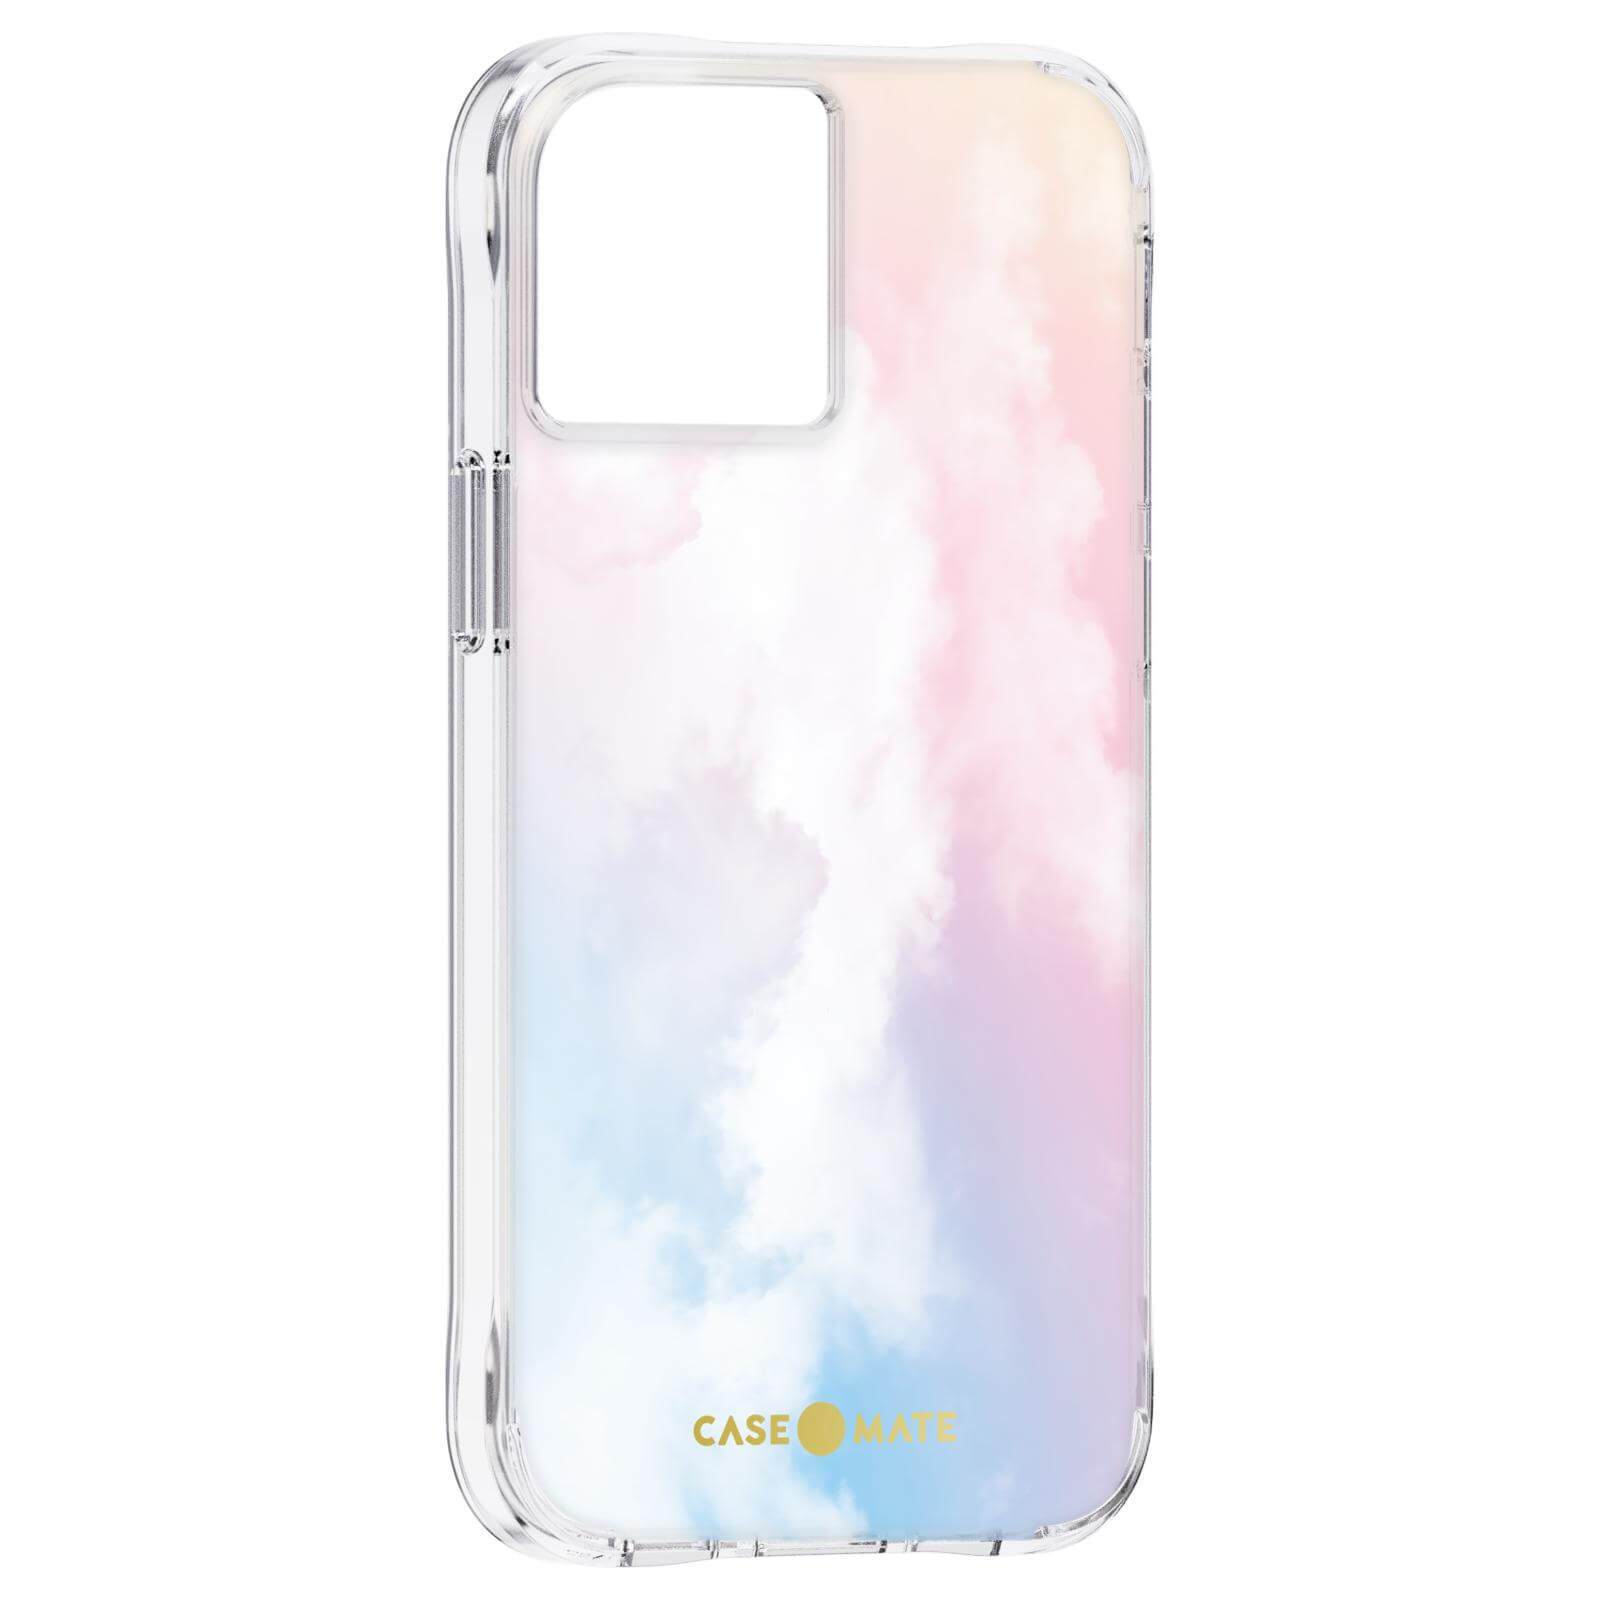 Clouds printed on case for iPhone 13 pro max. color::Cloud 9